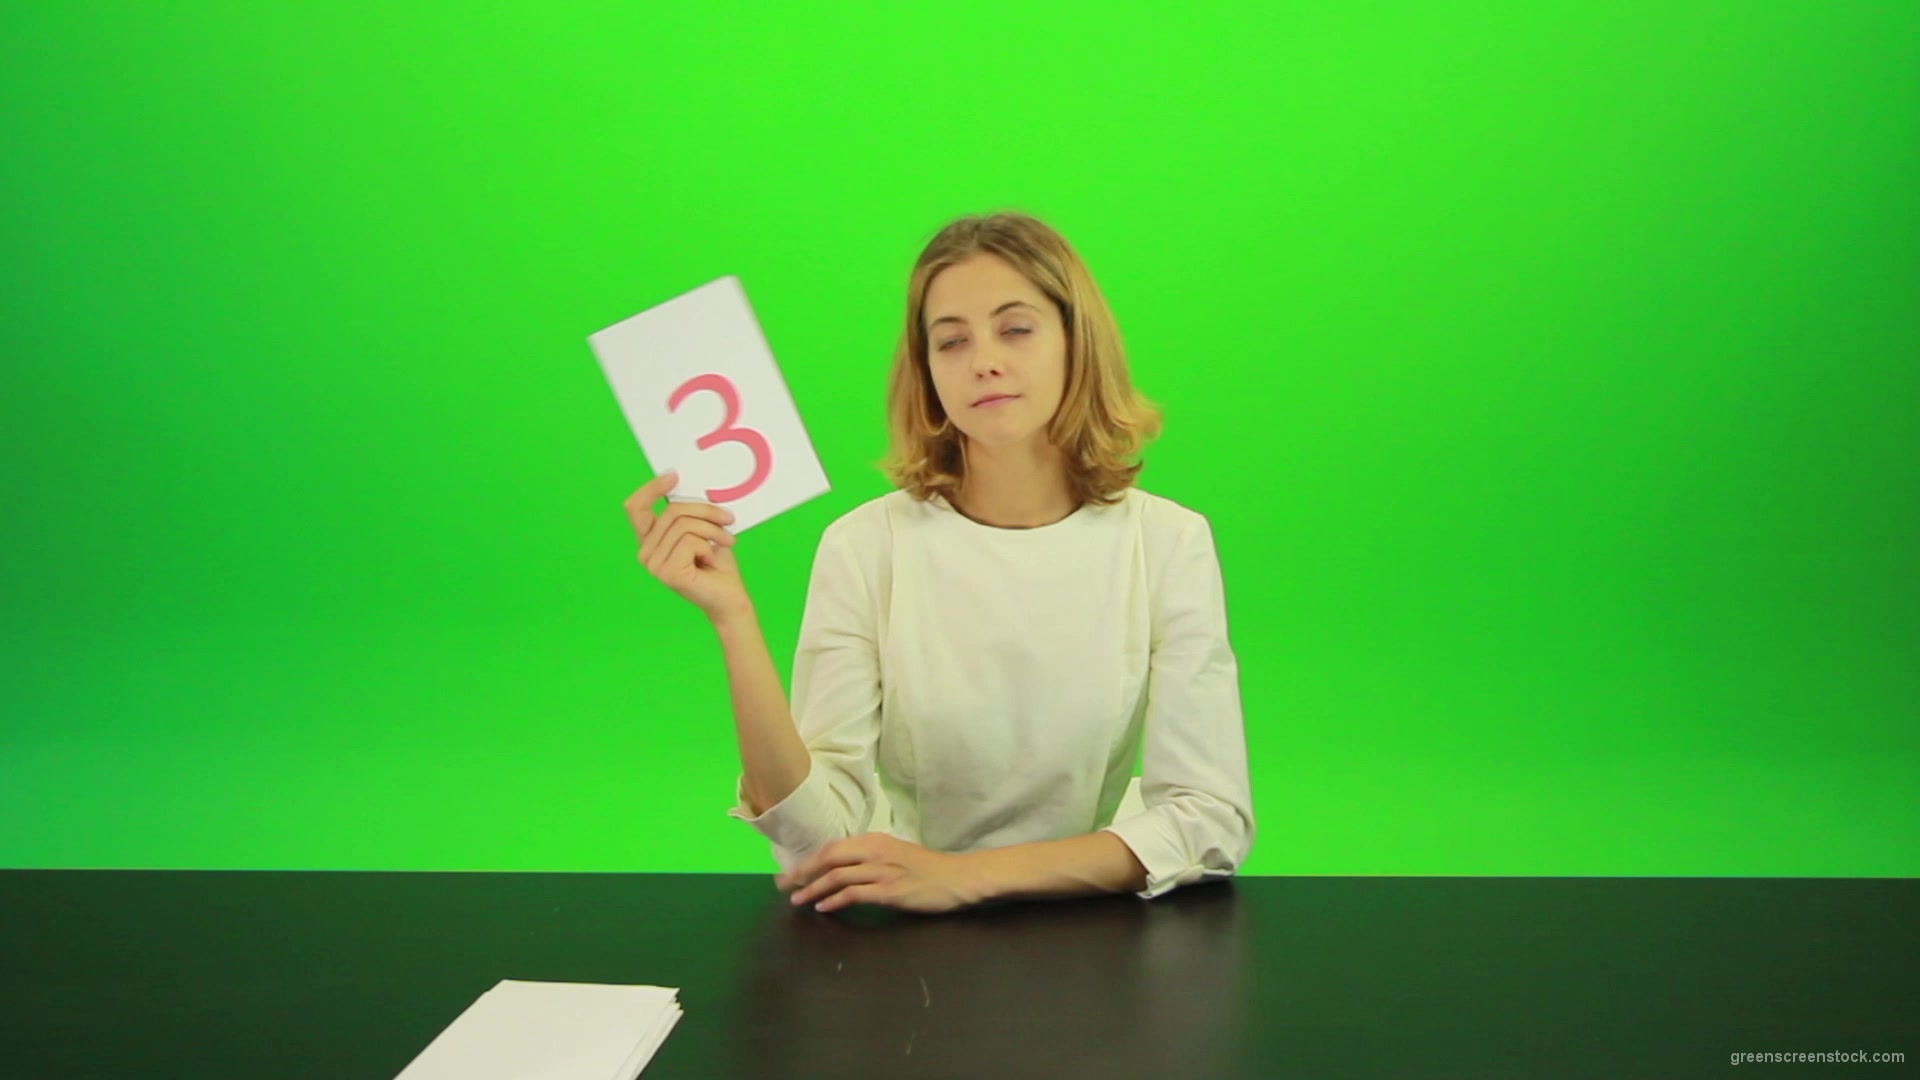 Blonde-hair-girl-in-white-shirt-give-3-point-mark-score-Full-HD-Green-Screen-Video-Footage_004 Green Screen Stock